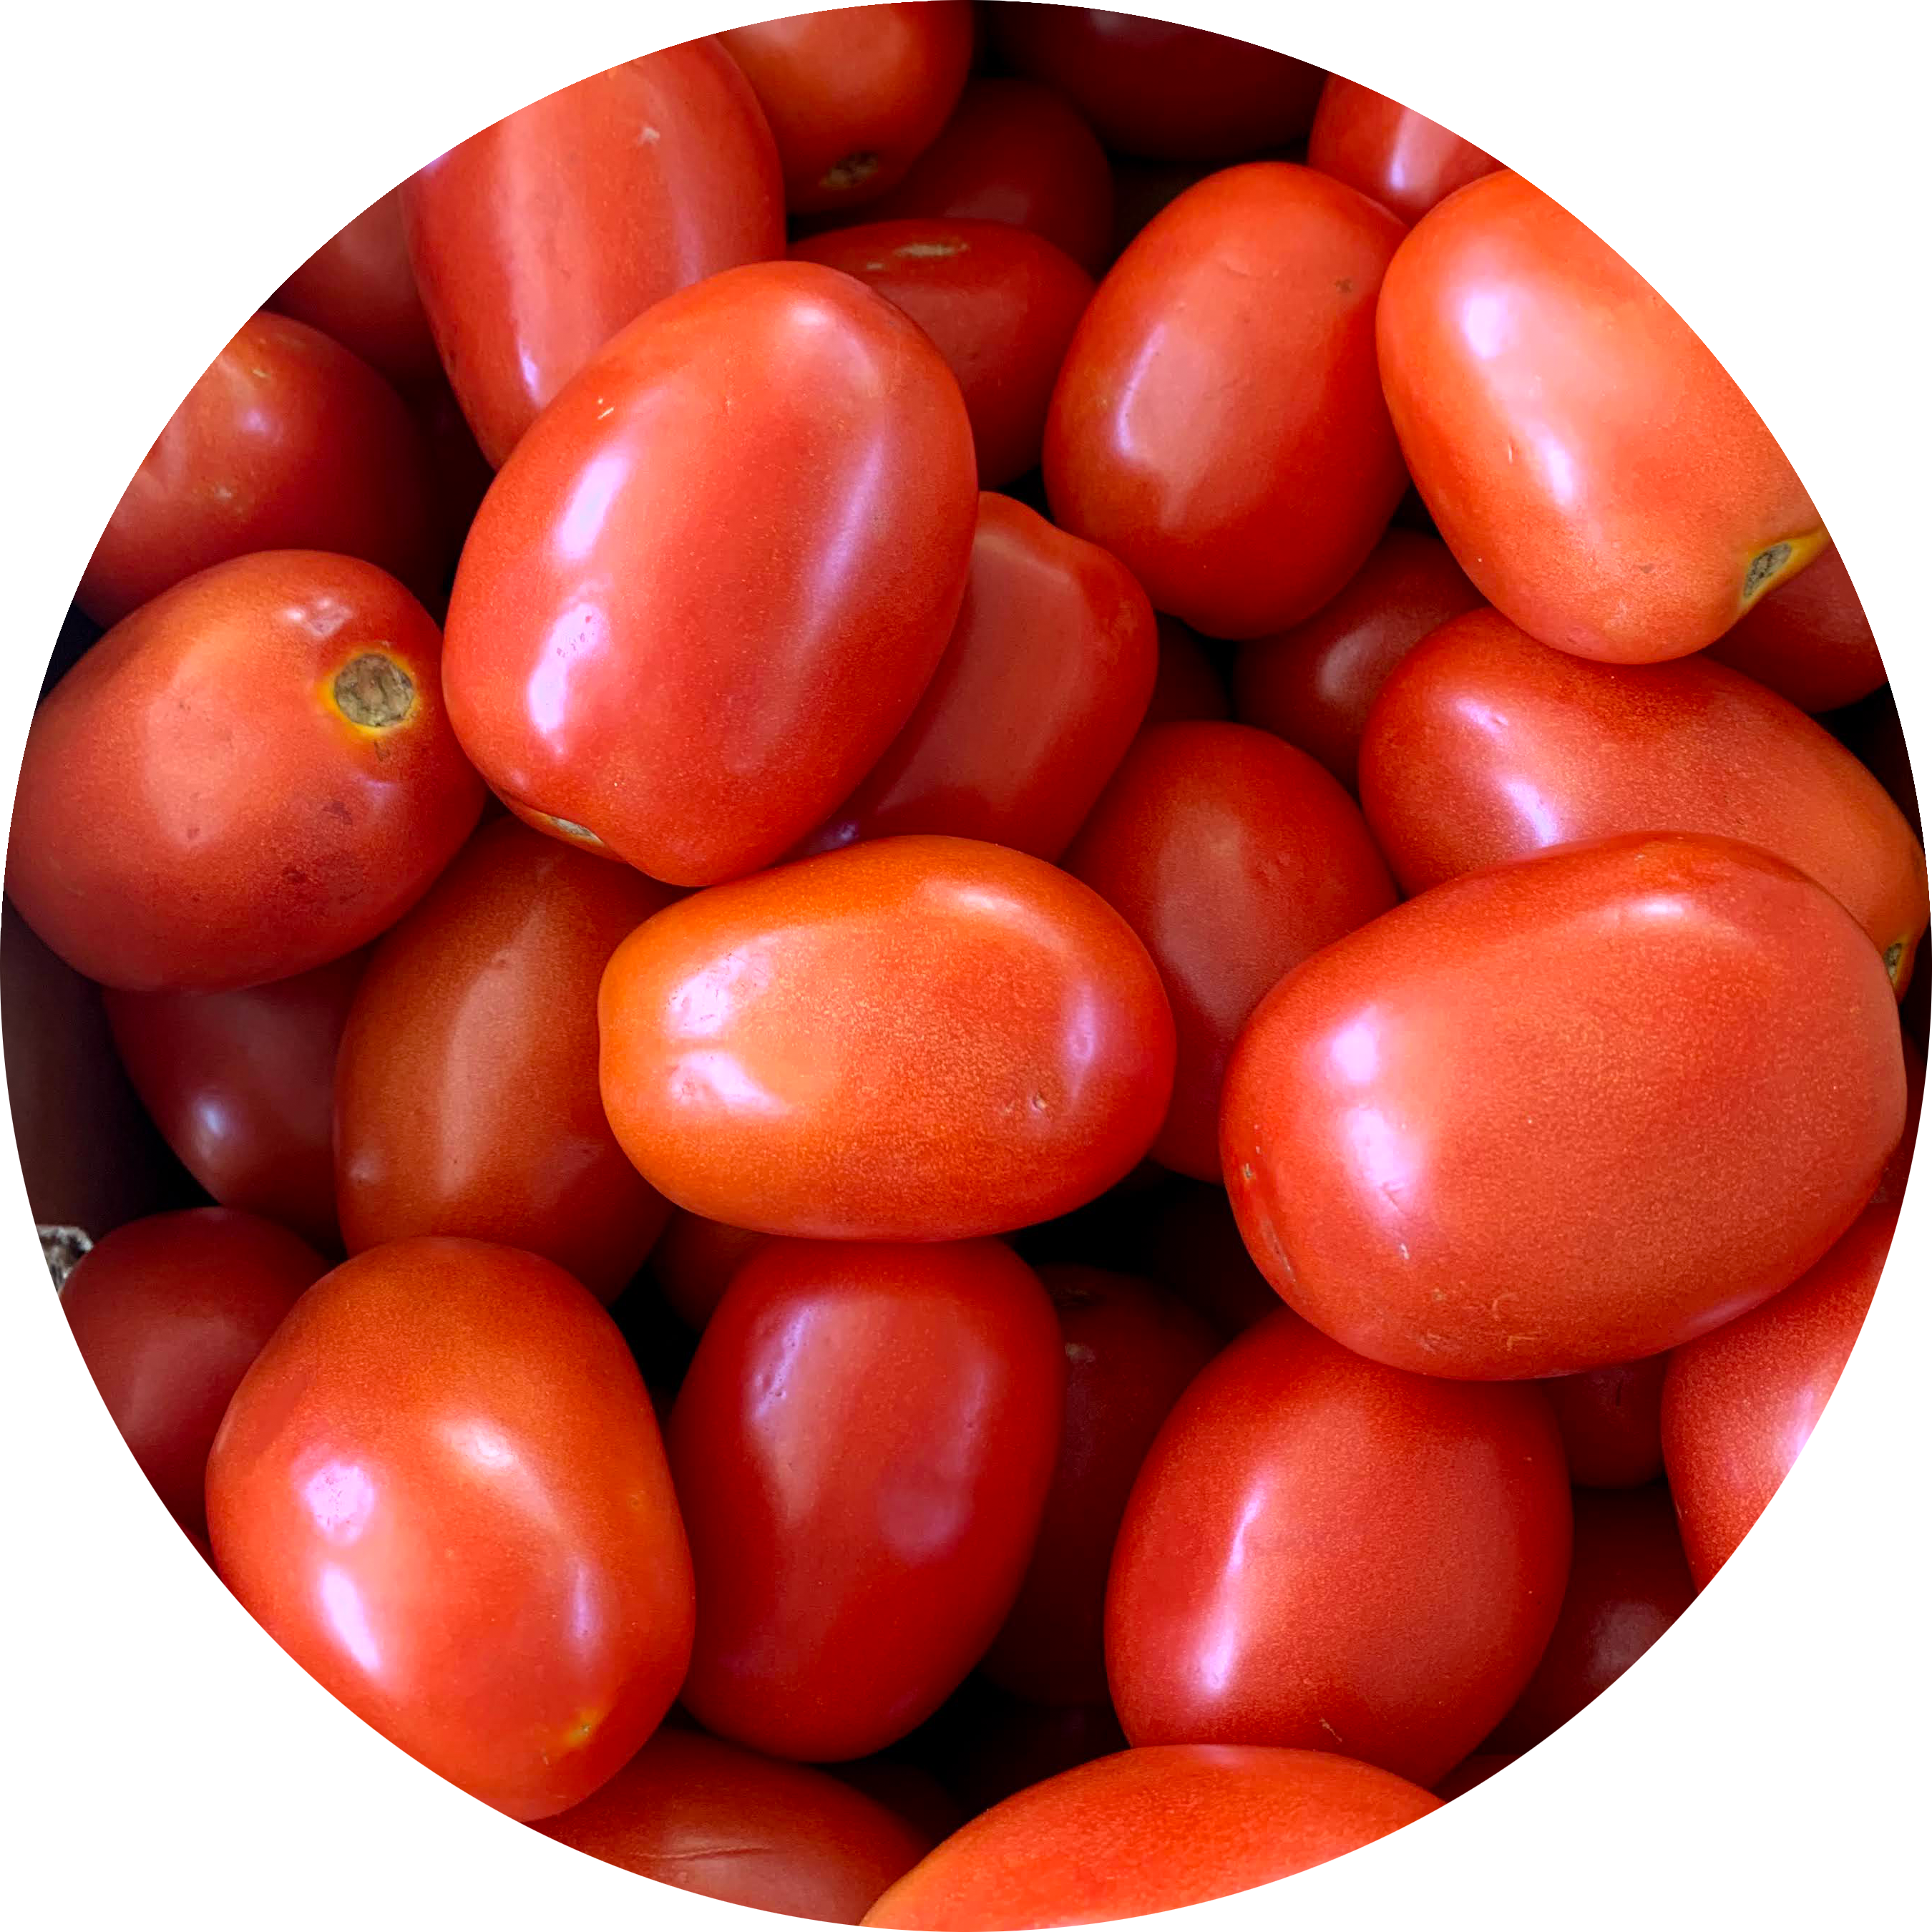 Research Update: Does wood ash help preserve tomatoes?